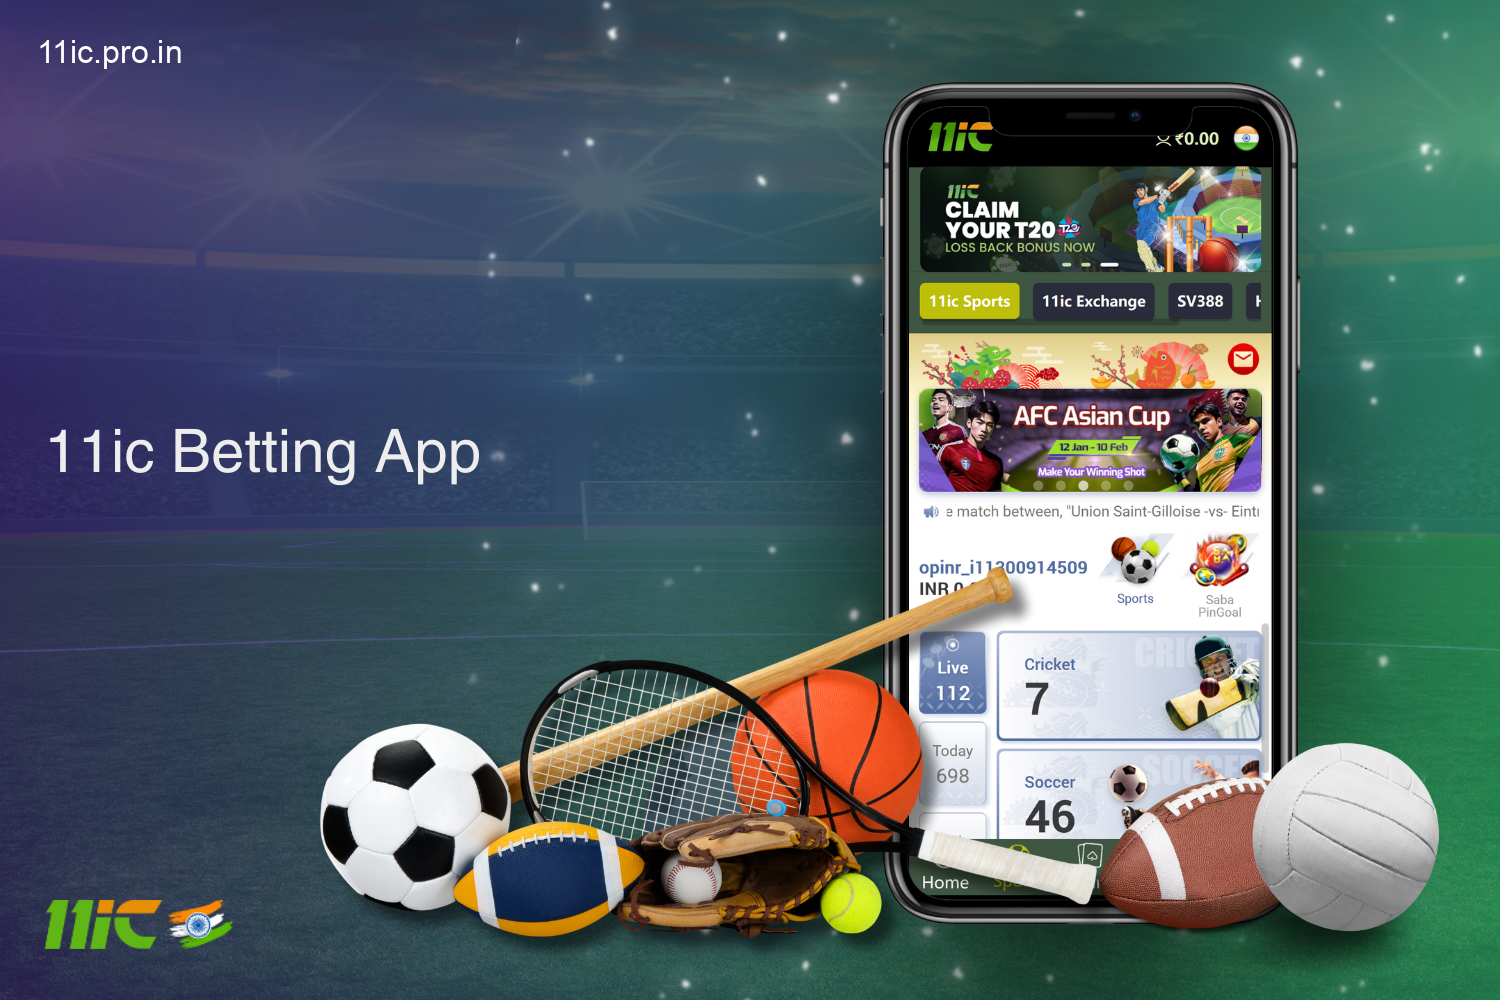 The 11ic betting app for users from India has access to popular sports and esports, betting exchange, full tournament list for online and live betting